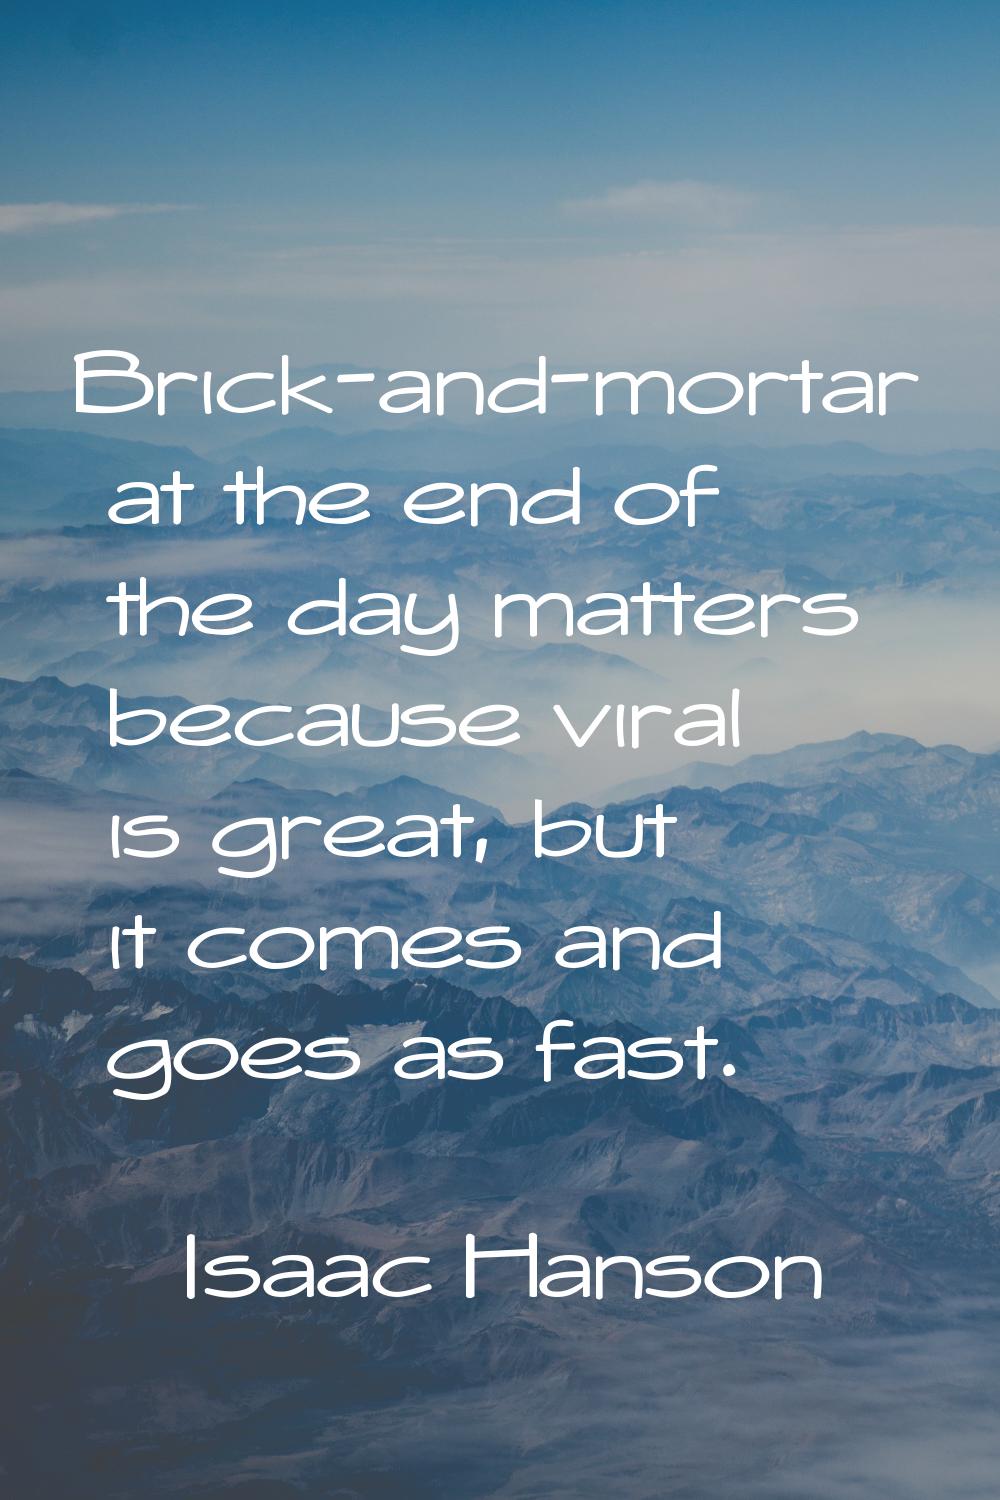 Brick-and-mortar at the end of the day matters because viral is great, but it comes and goes as fas